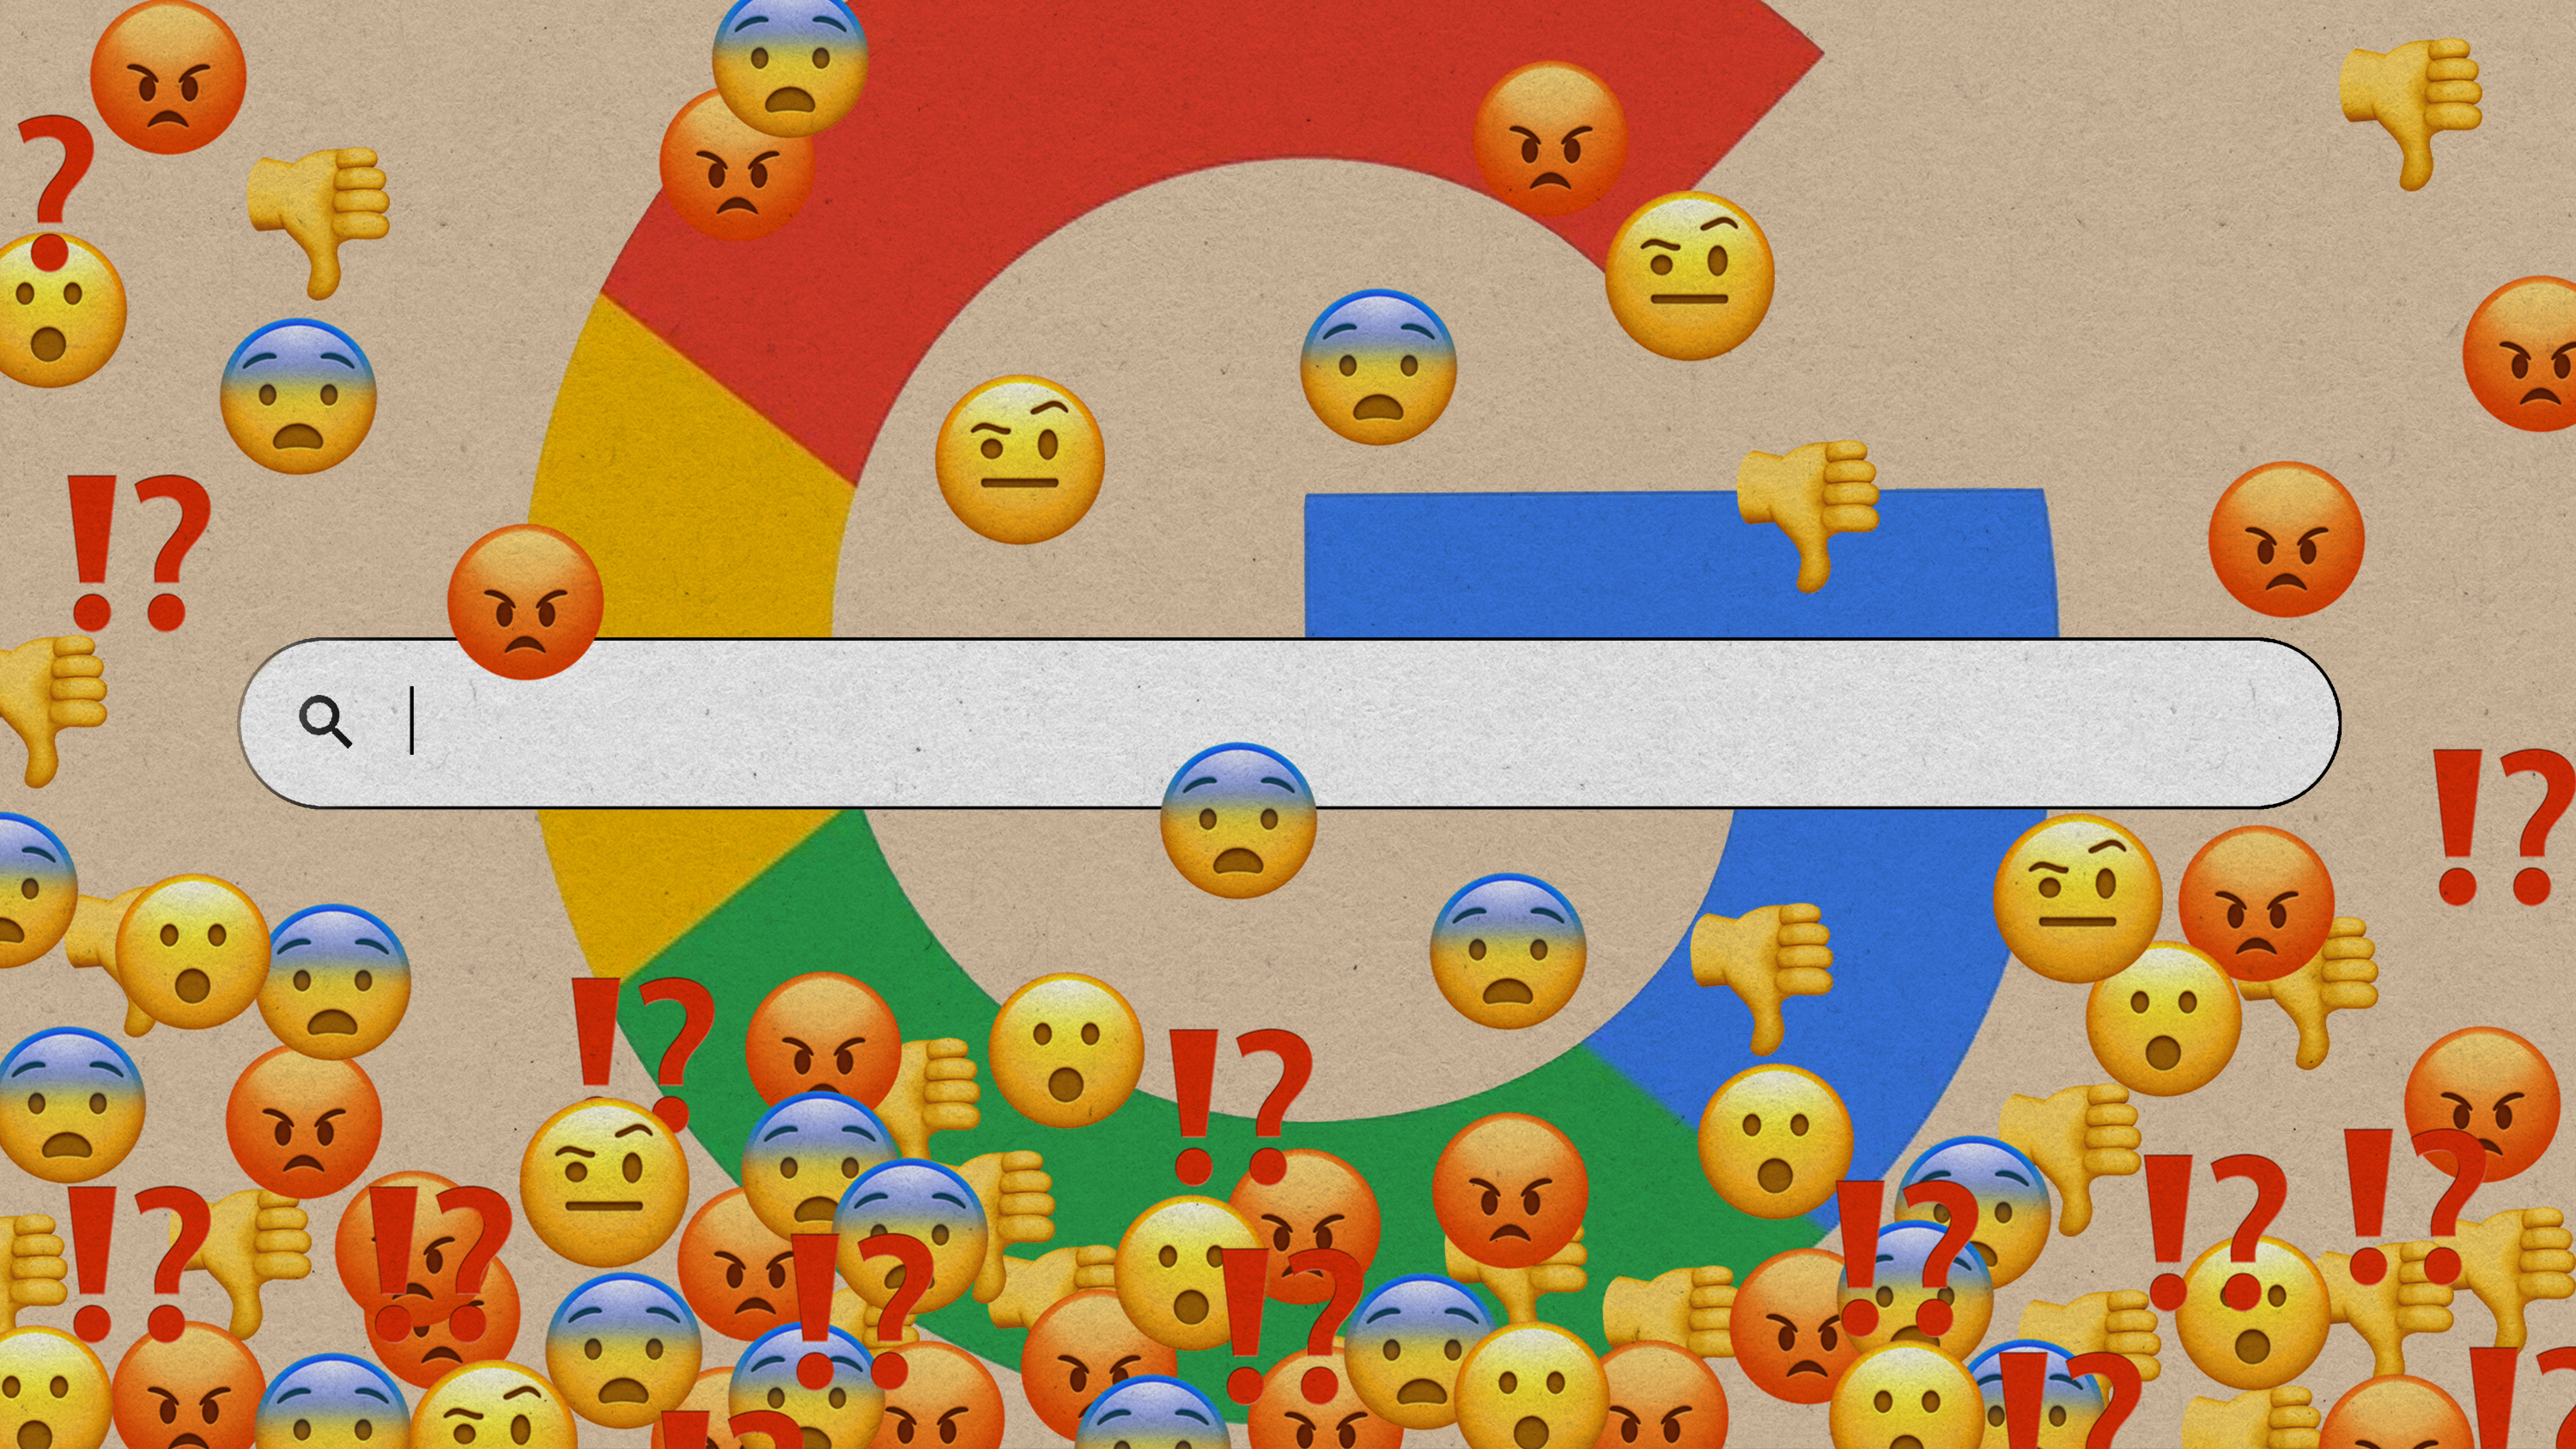 Photo illustration showing the Google search engine flooded with angry, confused and dissatisfied emojis.